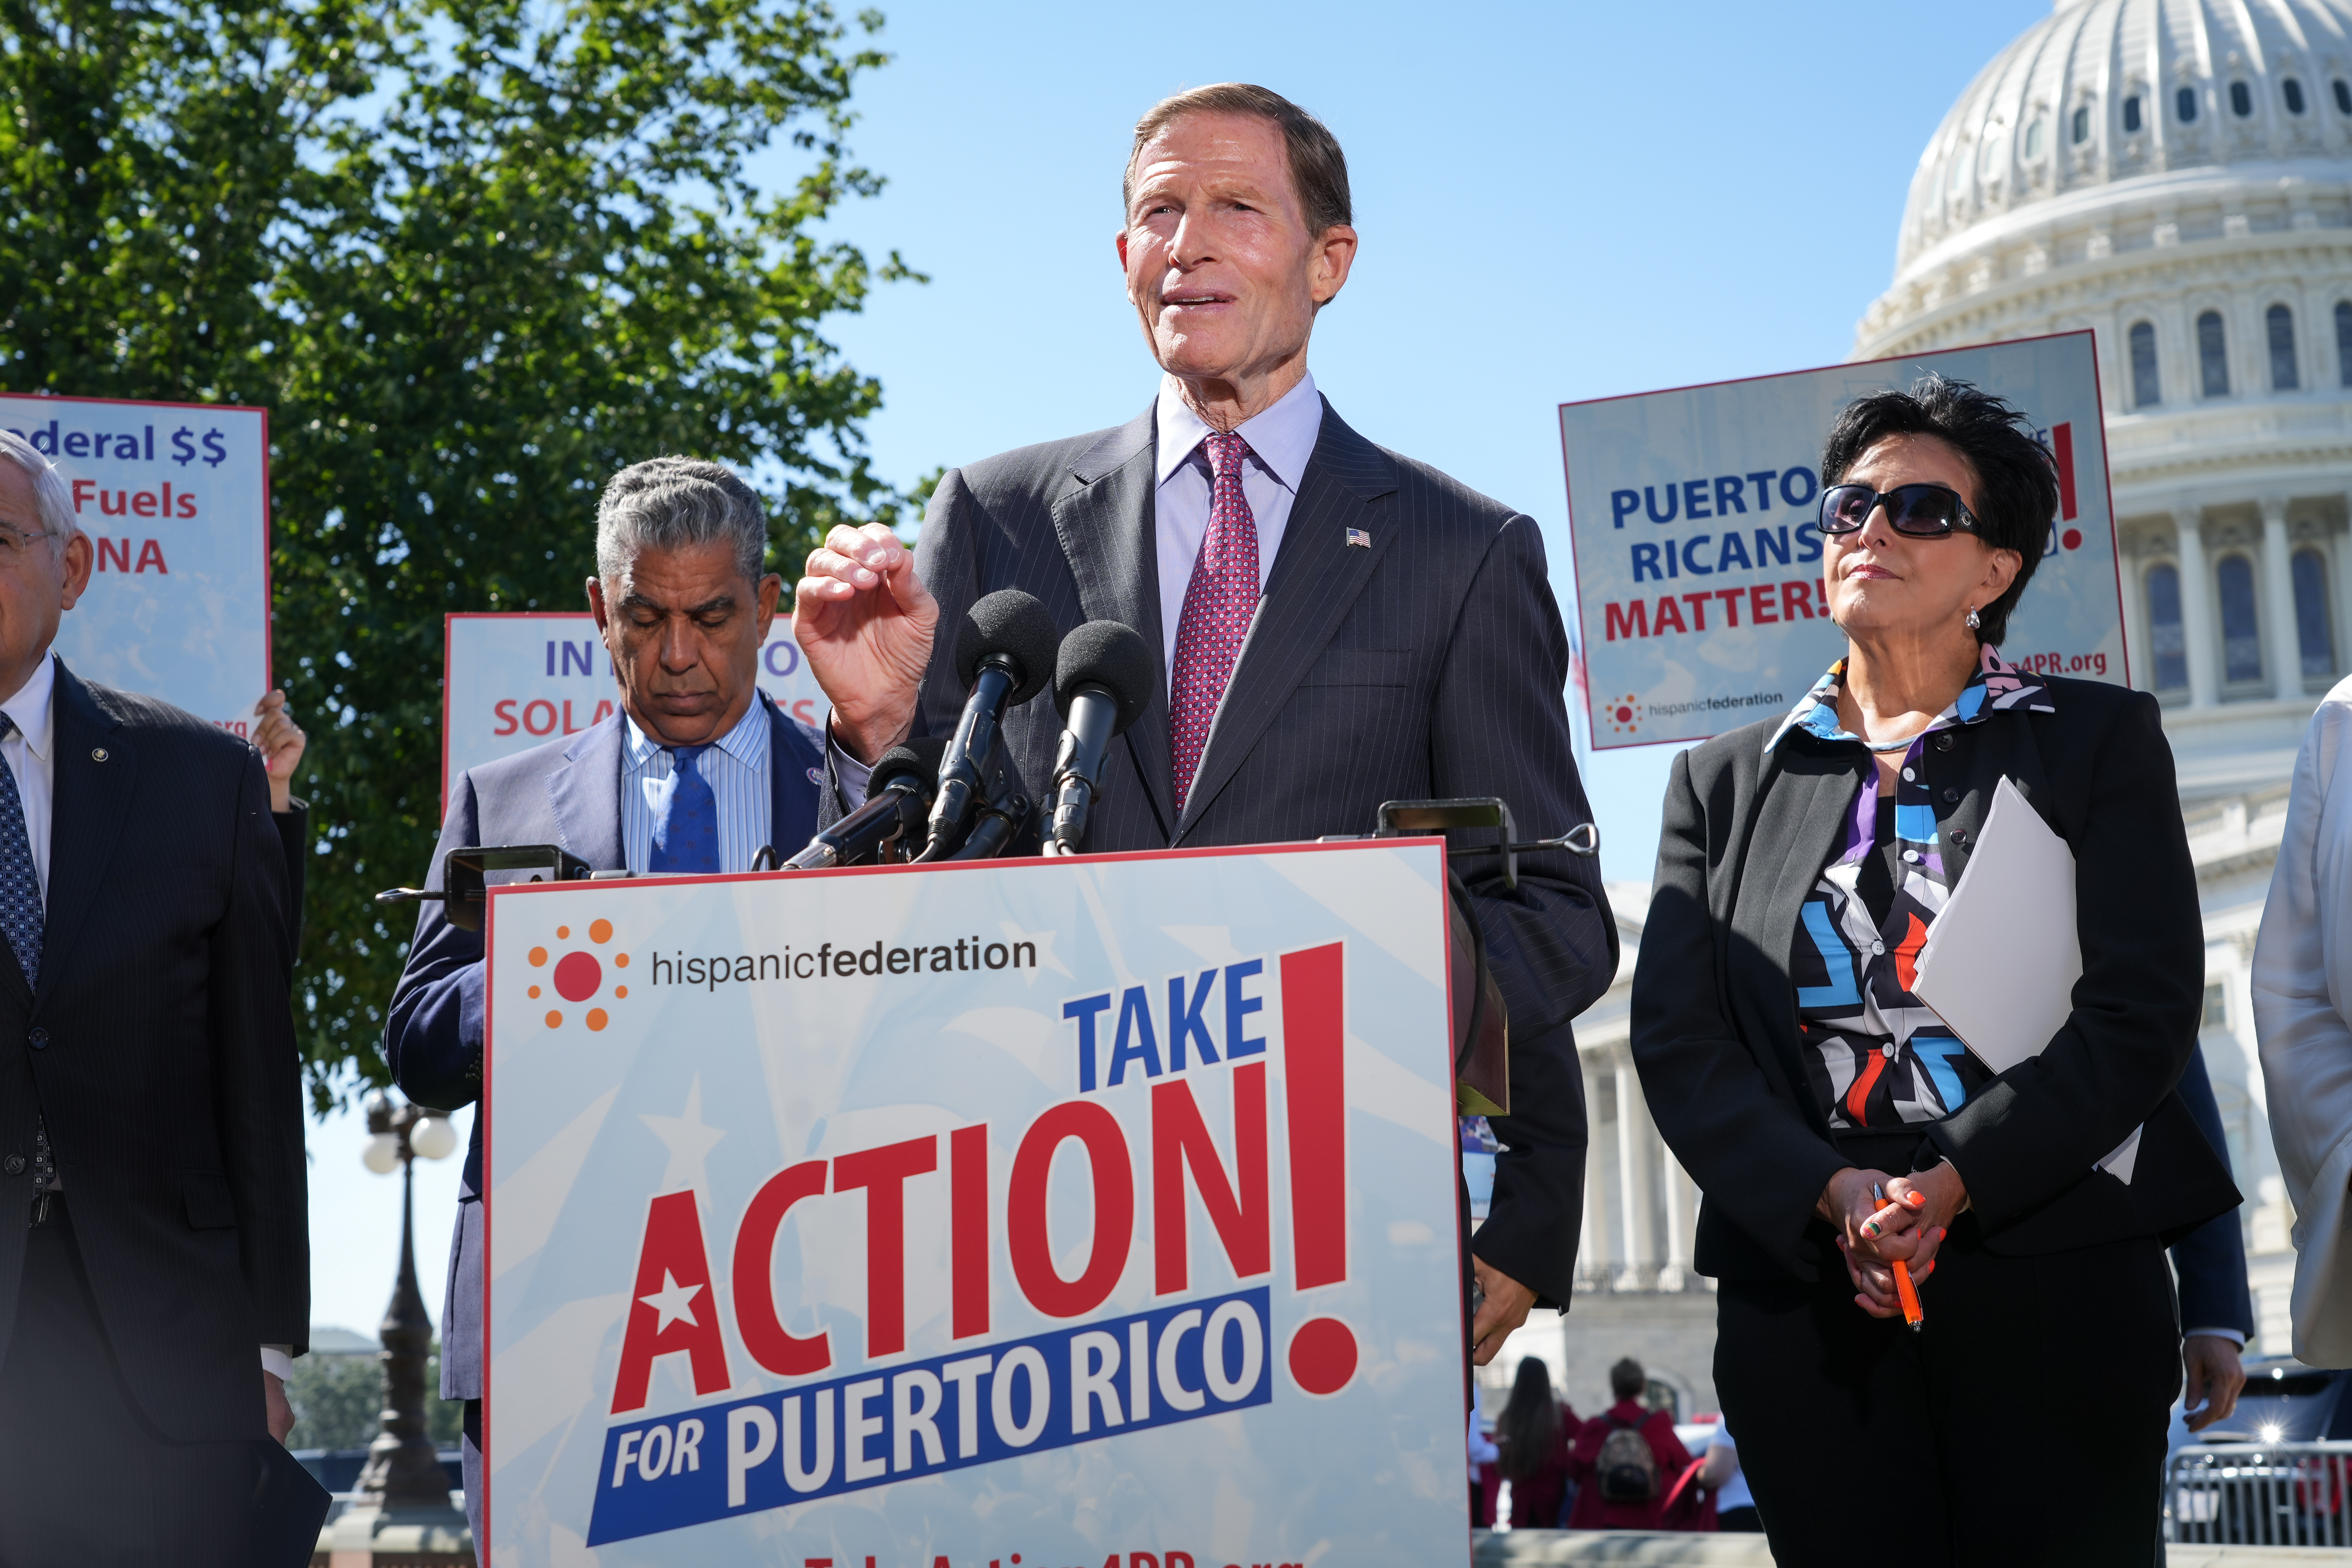 Blumenthal joined the Hispanic Federation, Take Action for Puerto Rico! and Members of Congress at a press conference calling for federal resources and assistance for Puerto Rico five years after Hurricane Maria and in the wake of new devastation from Hurricane Fiona.